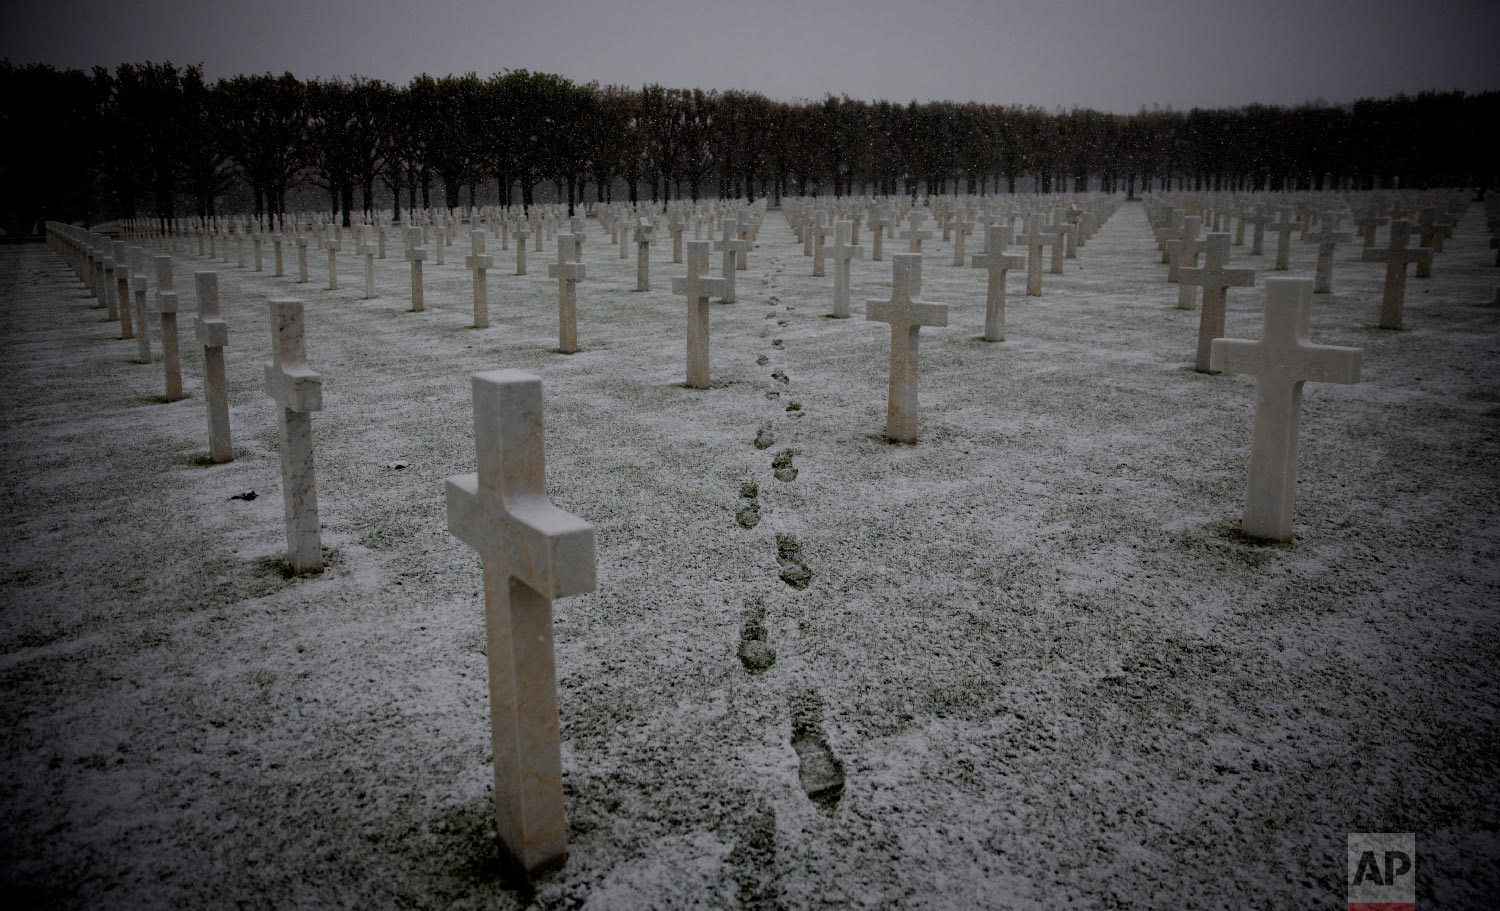  Footsteps are seen as the snow falls at the Meuse-Argonne American WWI cemetery in Romagne-Sous-Montfaucon, France on Oct. 30, 2018. (AP Photo/Virginia Mayo) 